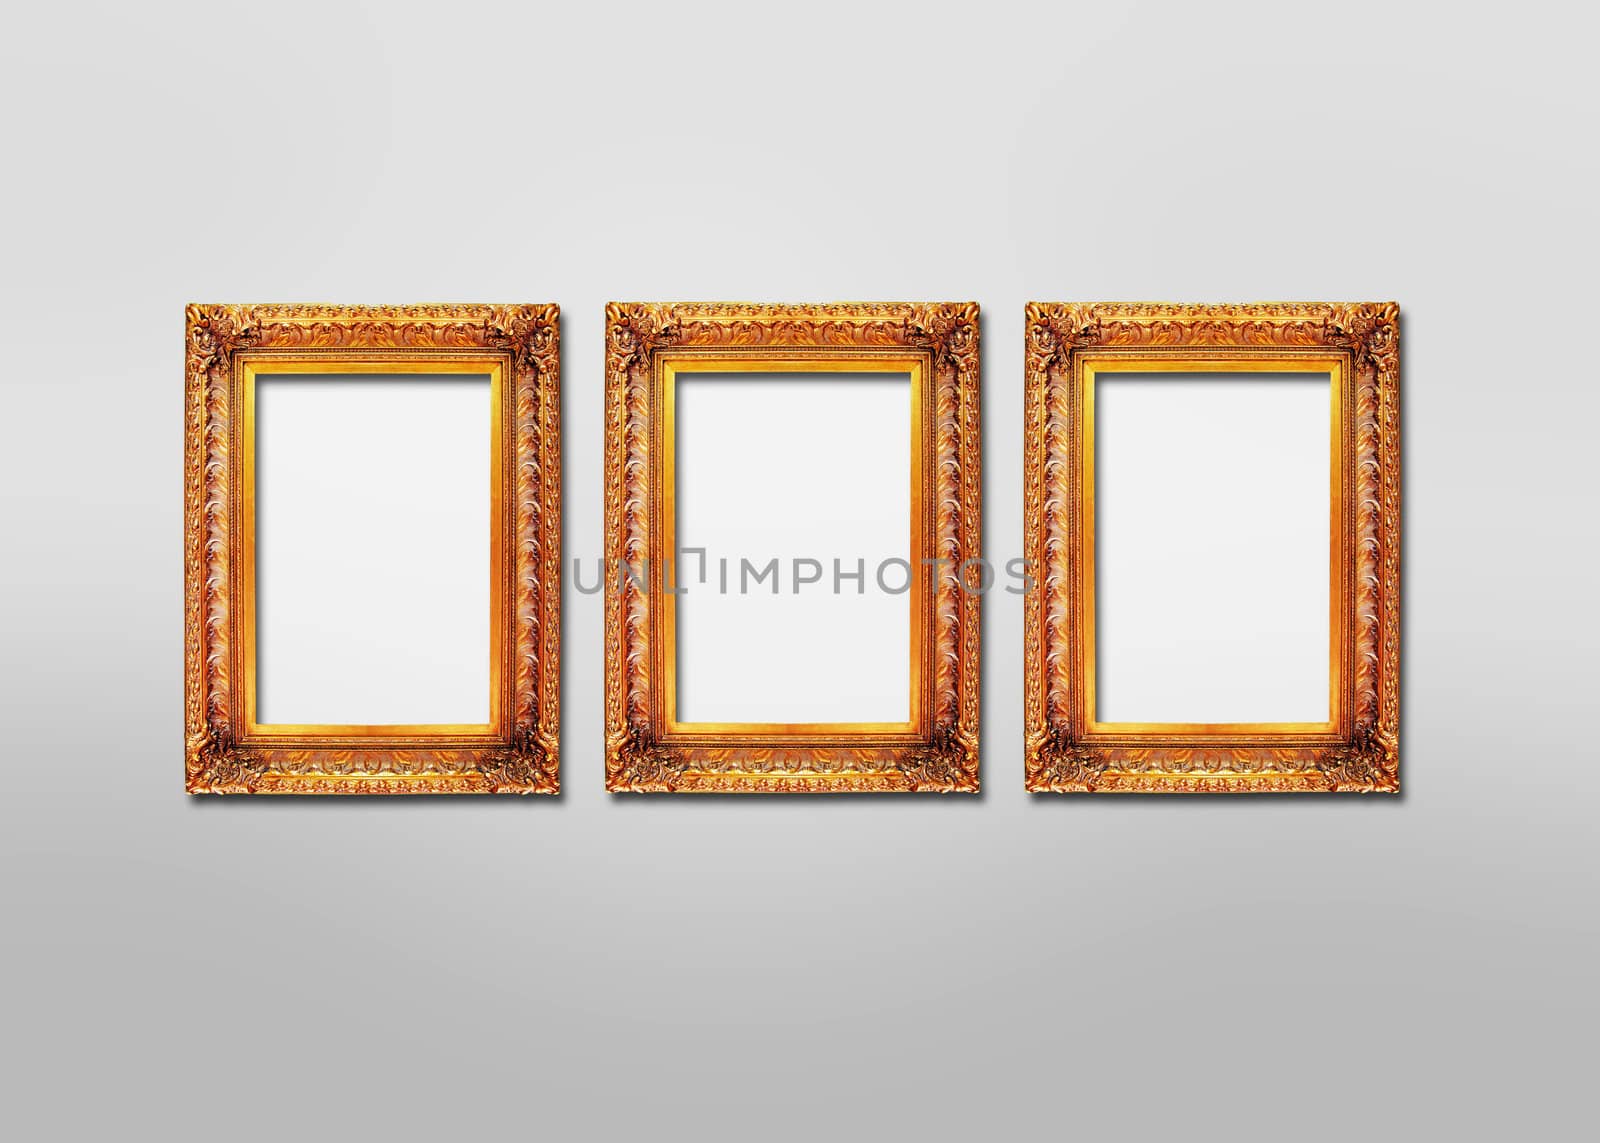 the beautiful golden frame for your pictures